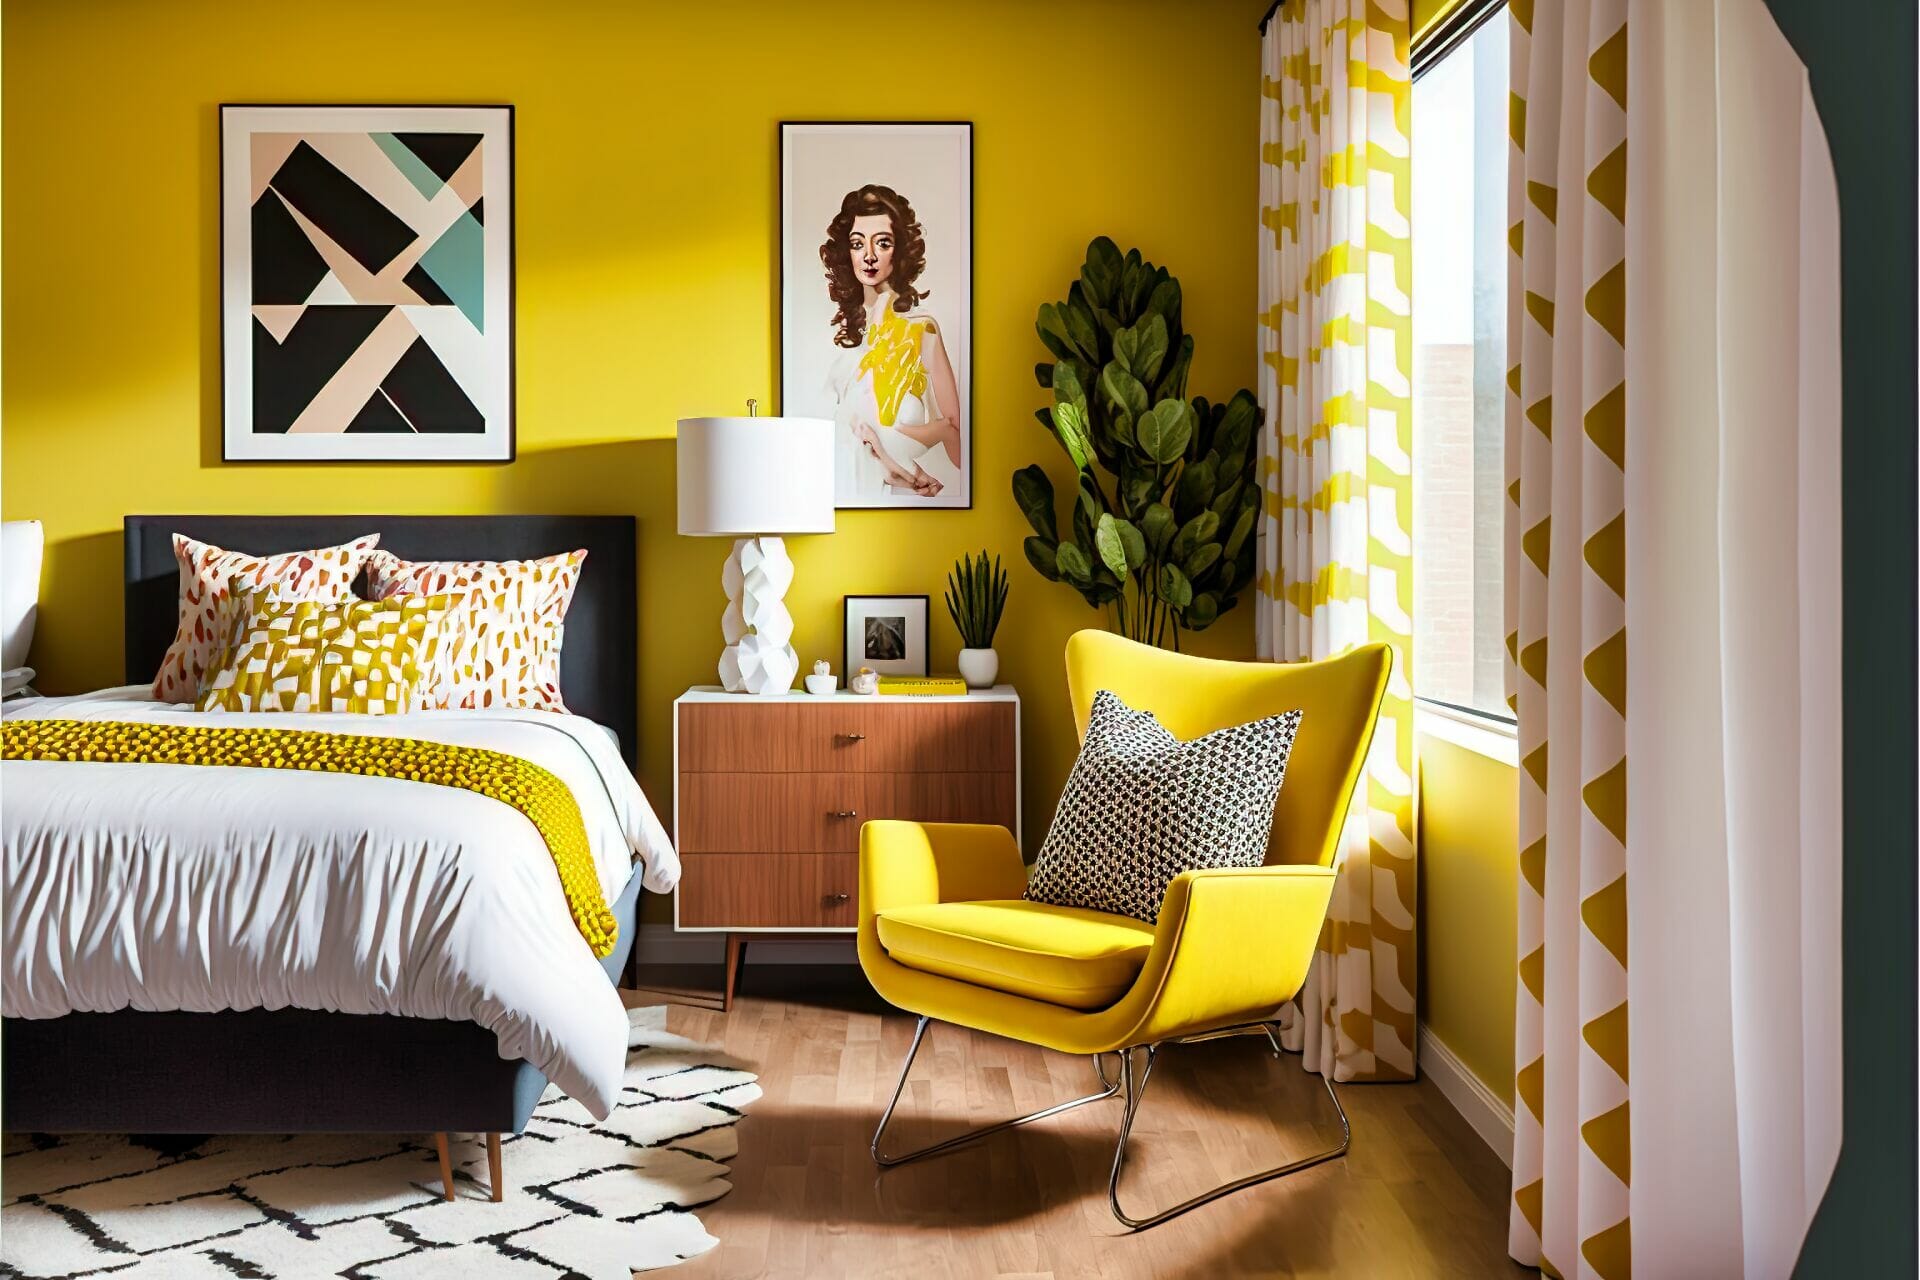 Mid-Century Modern Bedroom – A Retro Modern Bedroom Featuring A Bold Graphic Bedspread, A Vintage-Inspired Armchair, And A Bright Yellow Accent Wall.